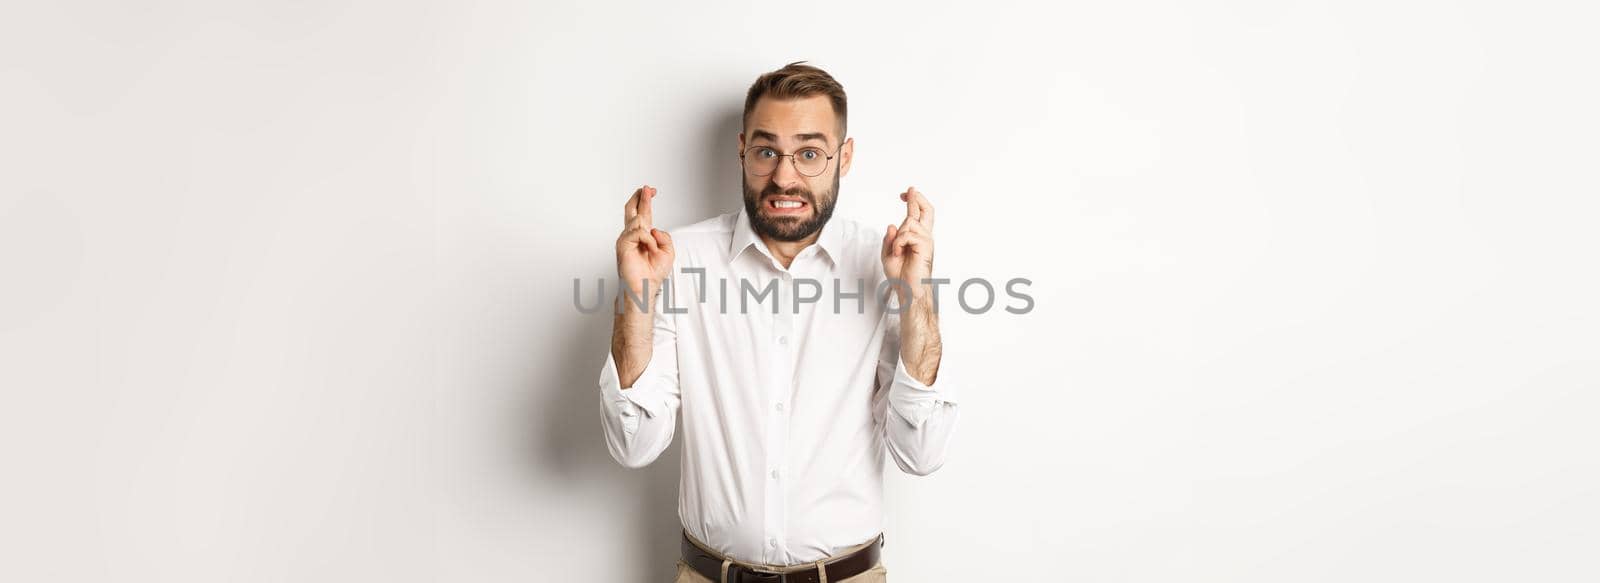 Worried man making a wish, cross fingers and hope for relish, standing over white background.